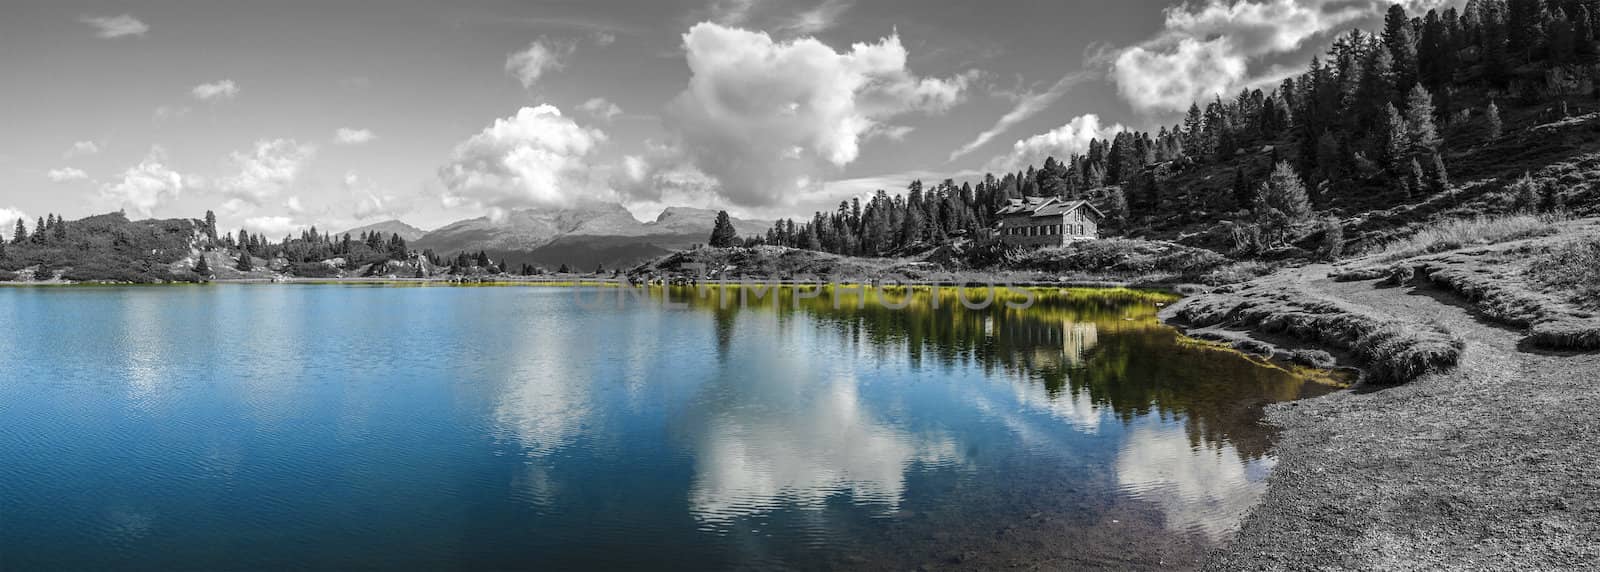 Lakes Colbricon, Dolomites - Italy by Mdc1970